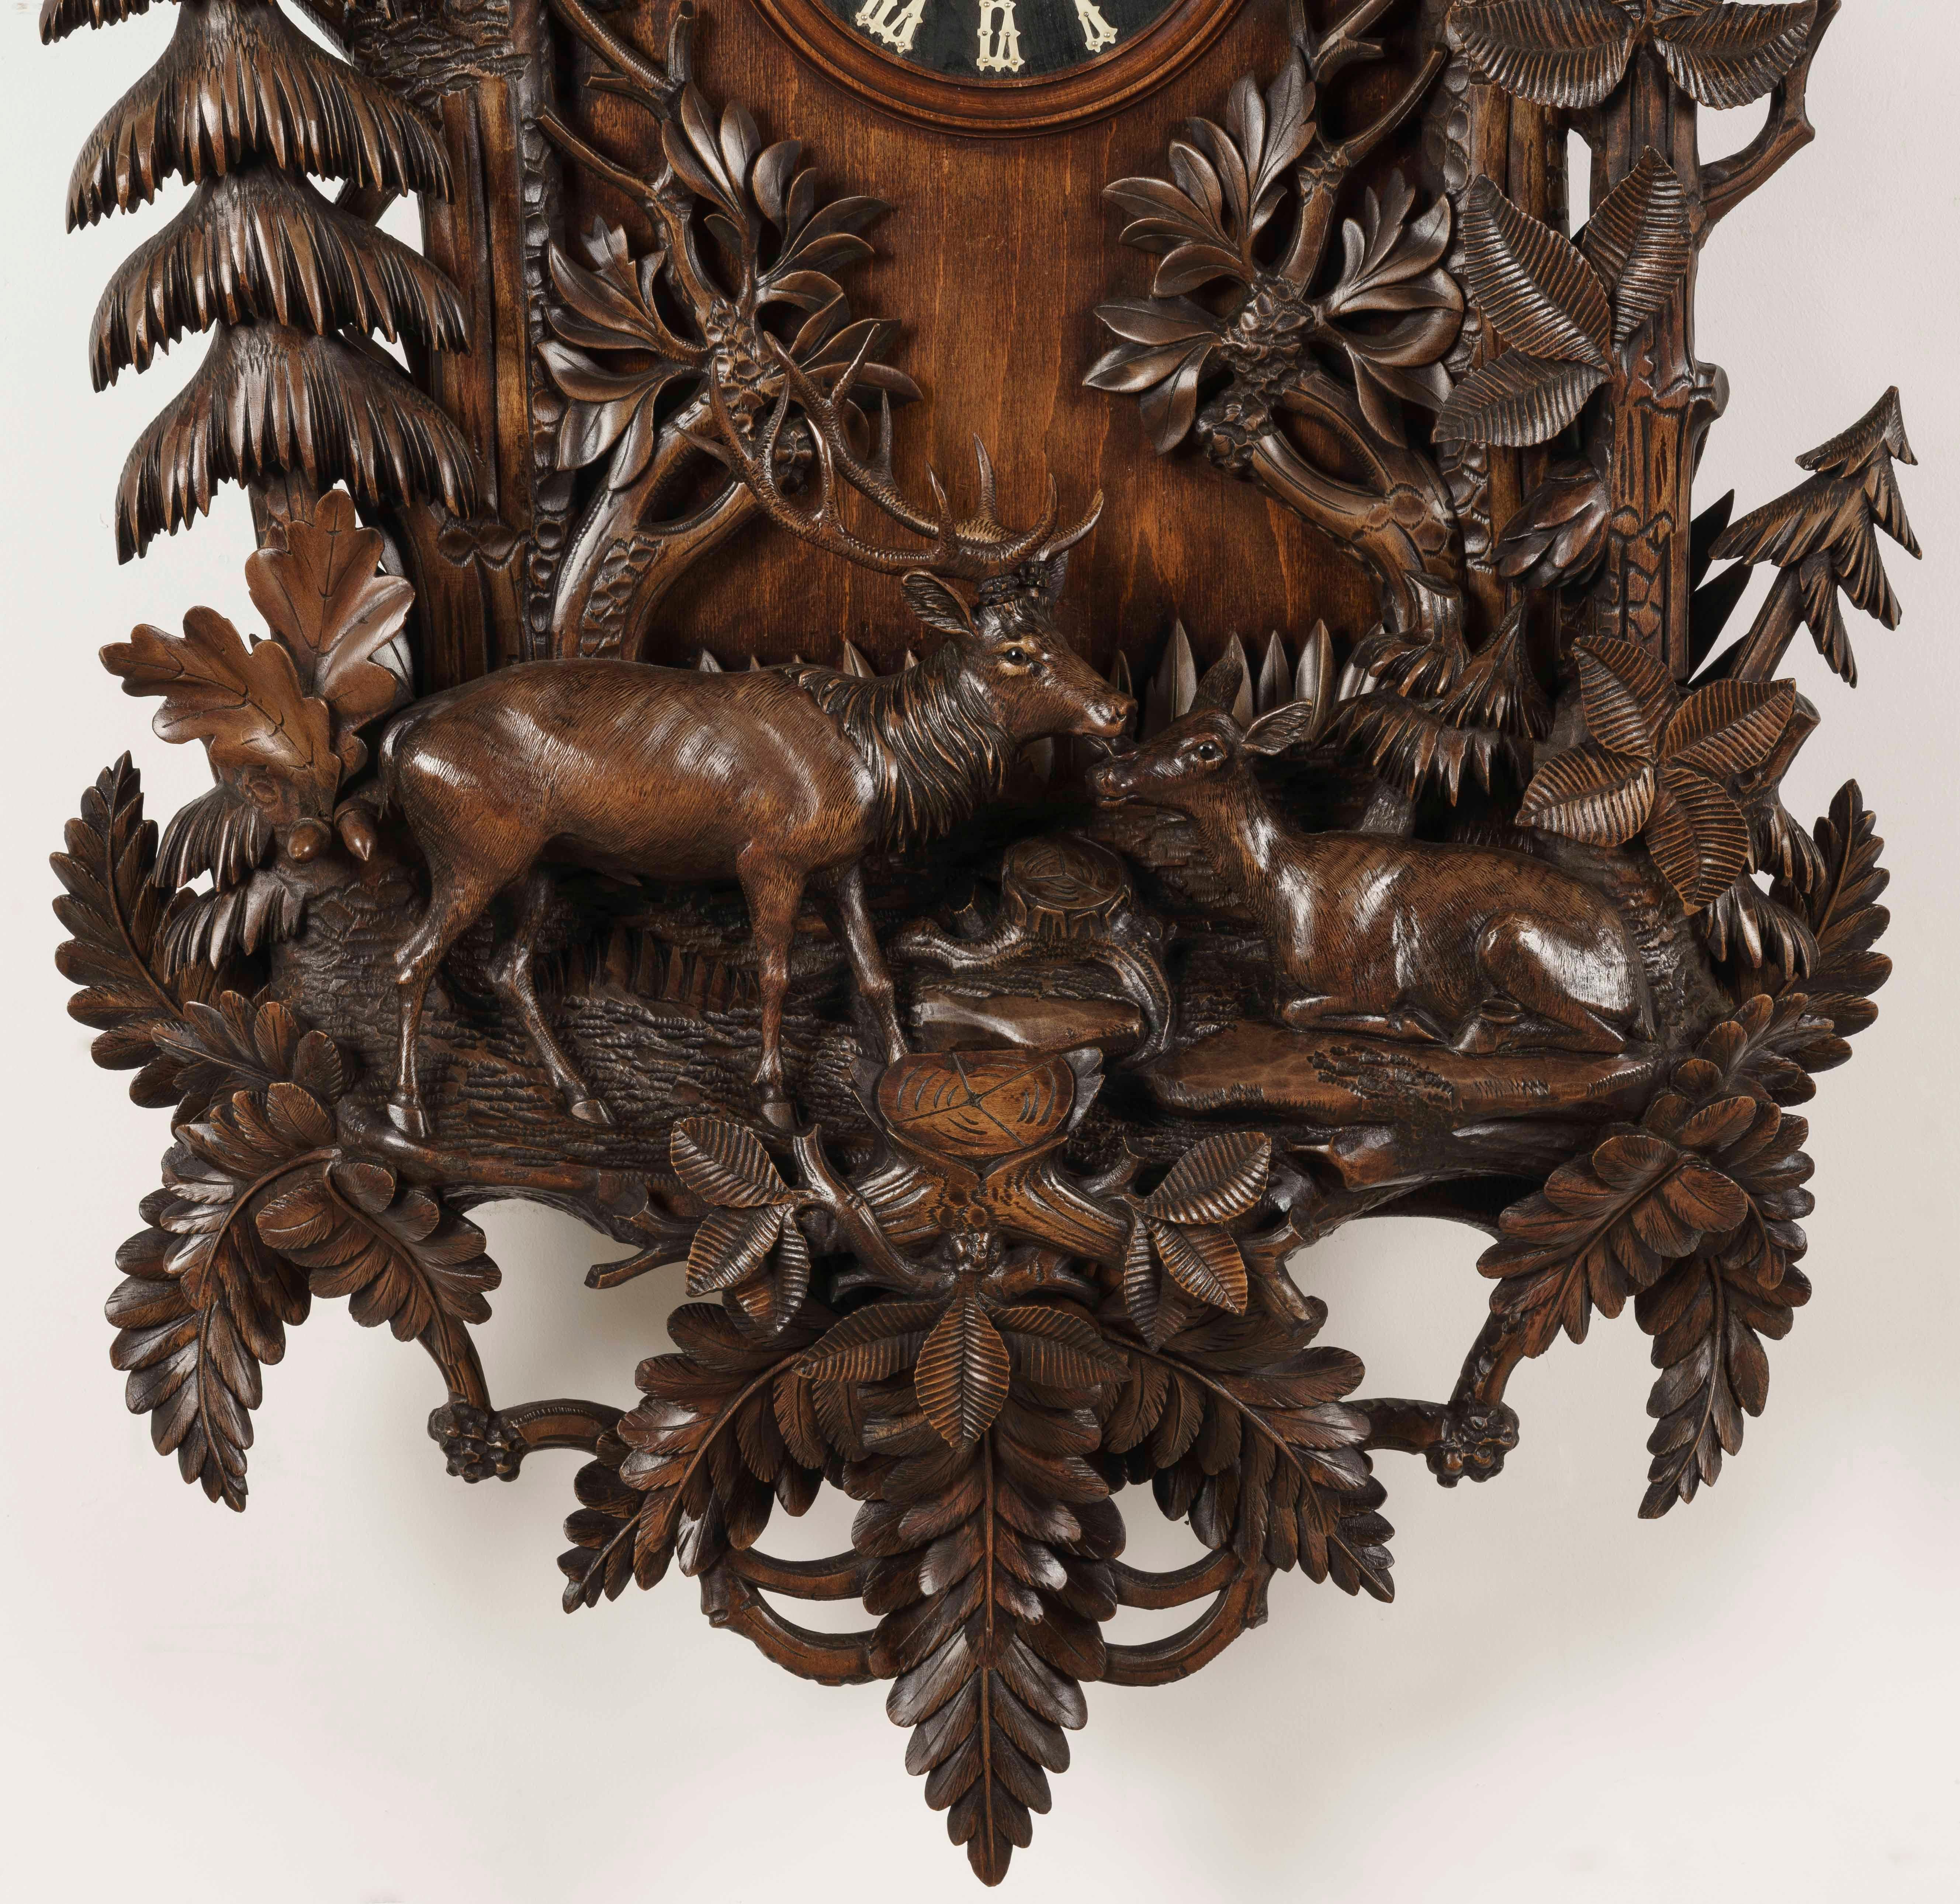 A Magnificent Black Forest wall clock

The Lindenwood case of grand proportions--nearly 6 feet tall-- and well carved with realistic deer and a perched bird within a wooded landscape, all amongst a branched garland of oak leaves; the weight-driven